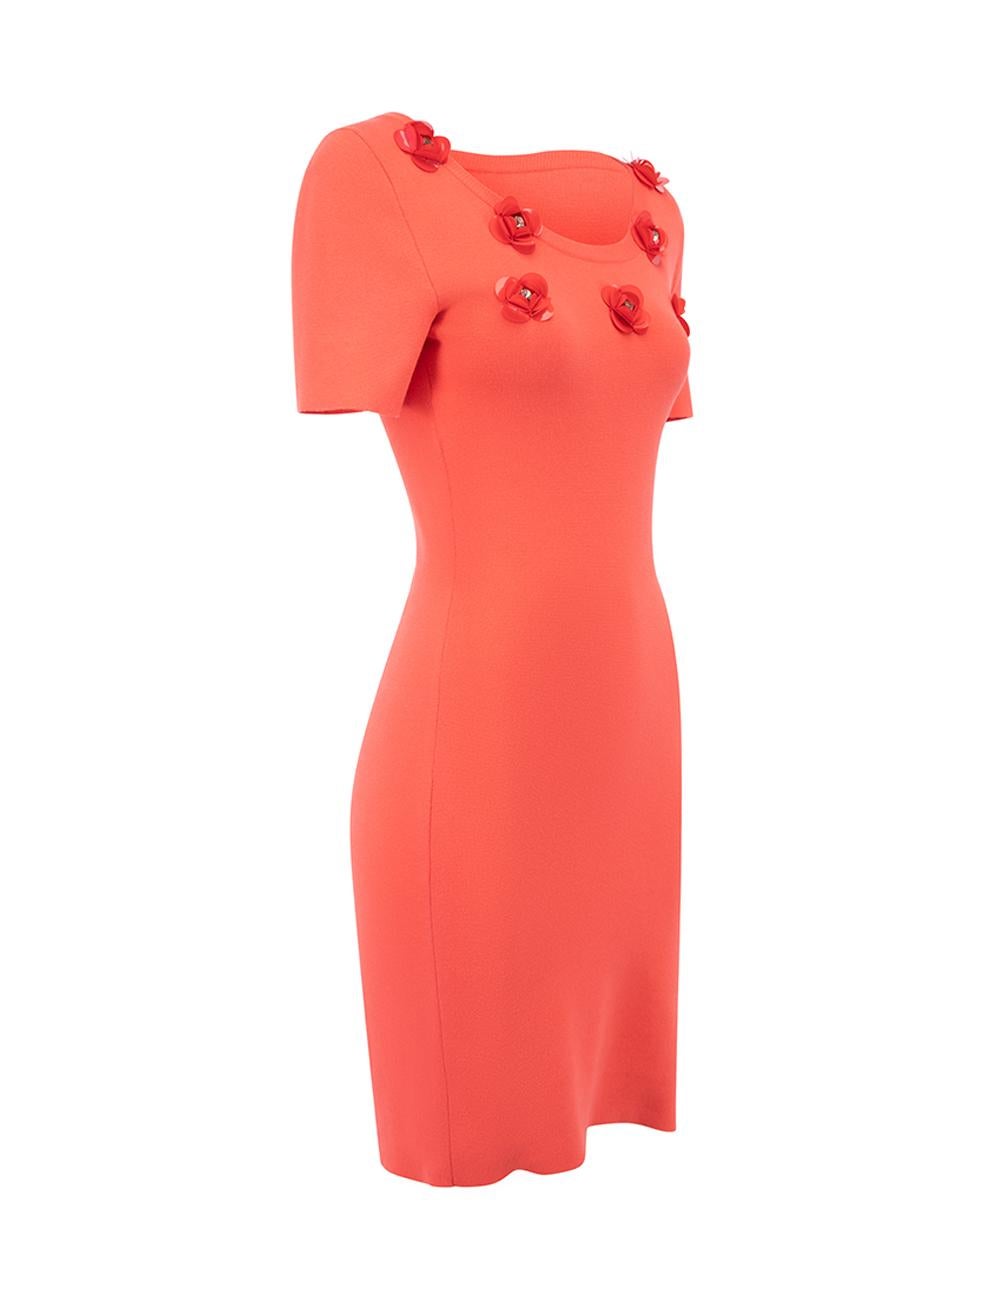 CONDITION is Very good. Minimal wear to dress is evident. Minimal wear to the sequins flowers which look a little discoloured on this used Boutique Moschino designer resale item. 
 
 Details
  Coral
 Synthetic
 Mini dress
 Round neckline
 Floral